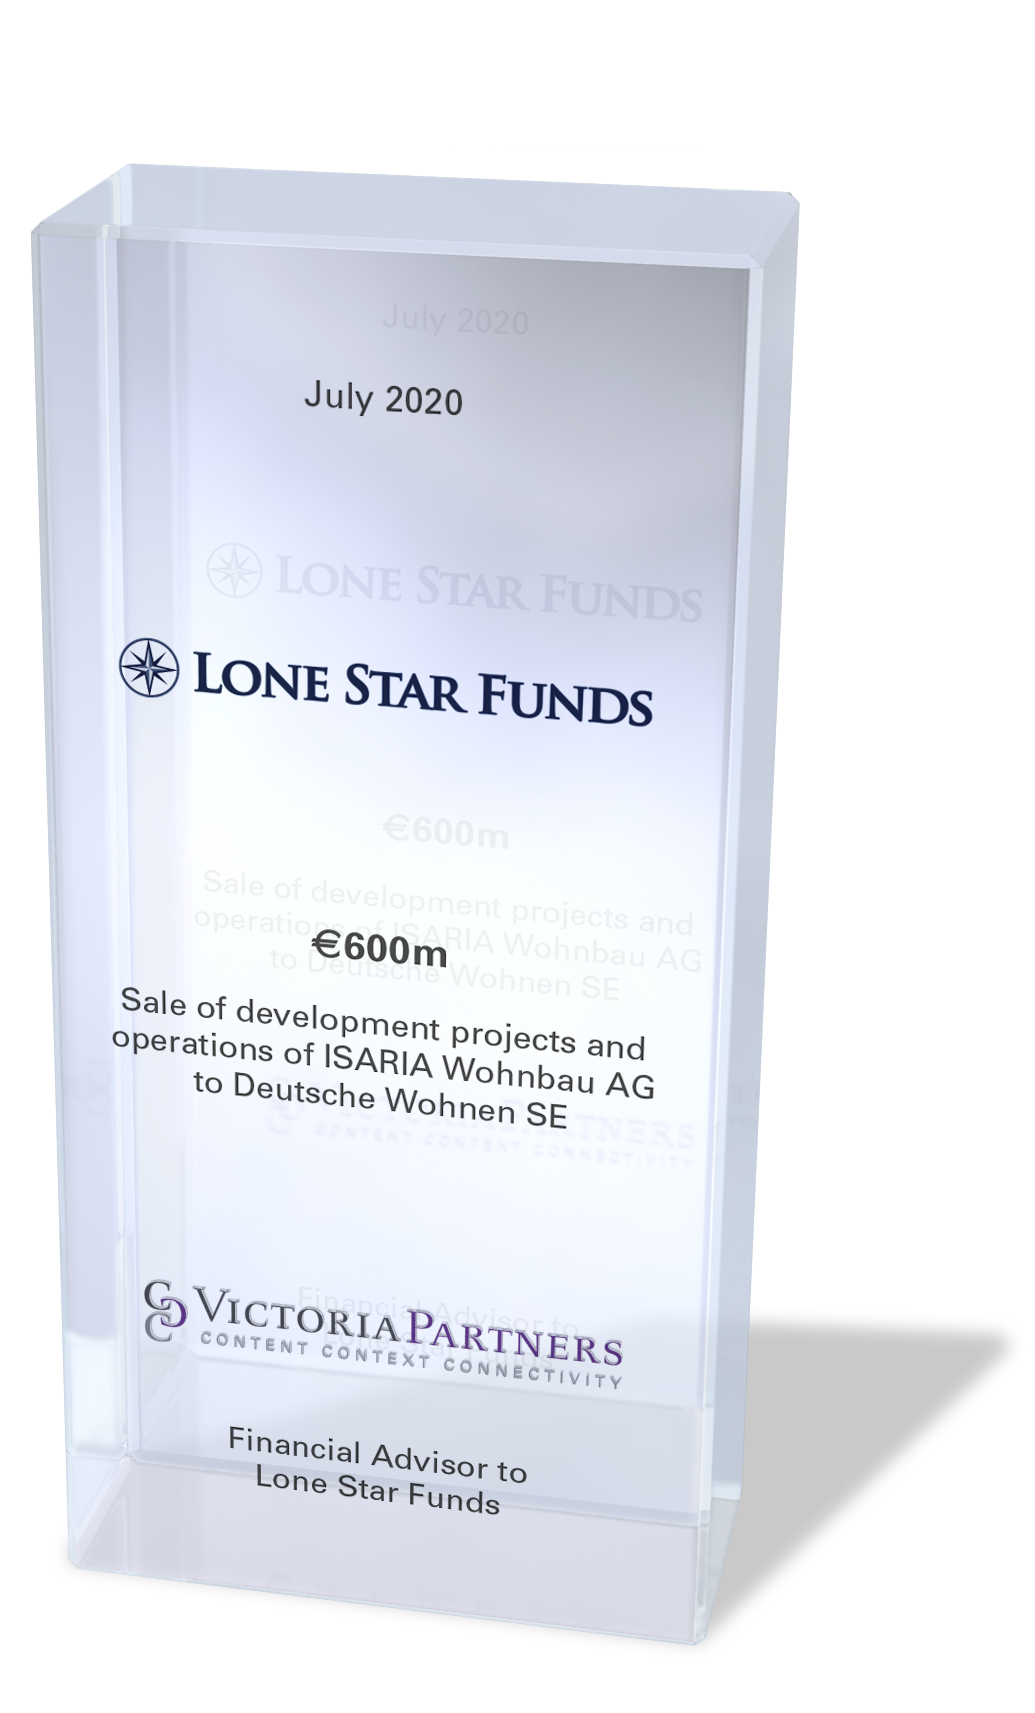 VICTORIAPARTNERS - Financial Advisor to Lone Star Funds - July 2020